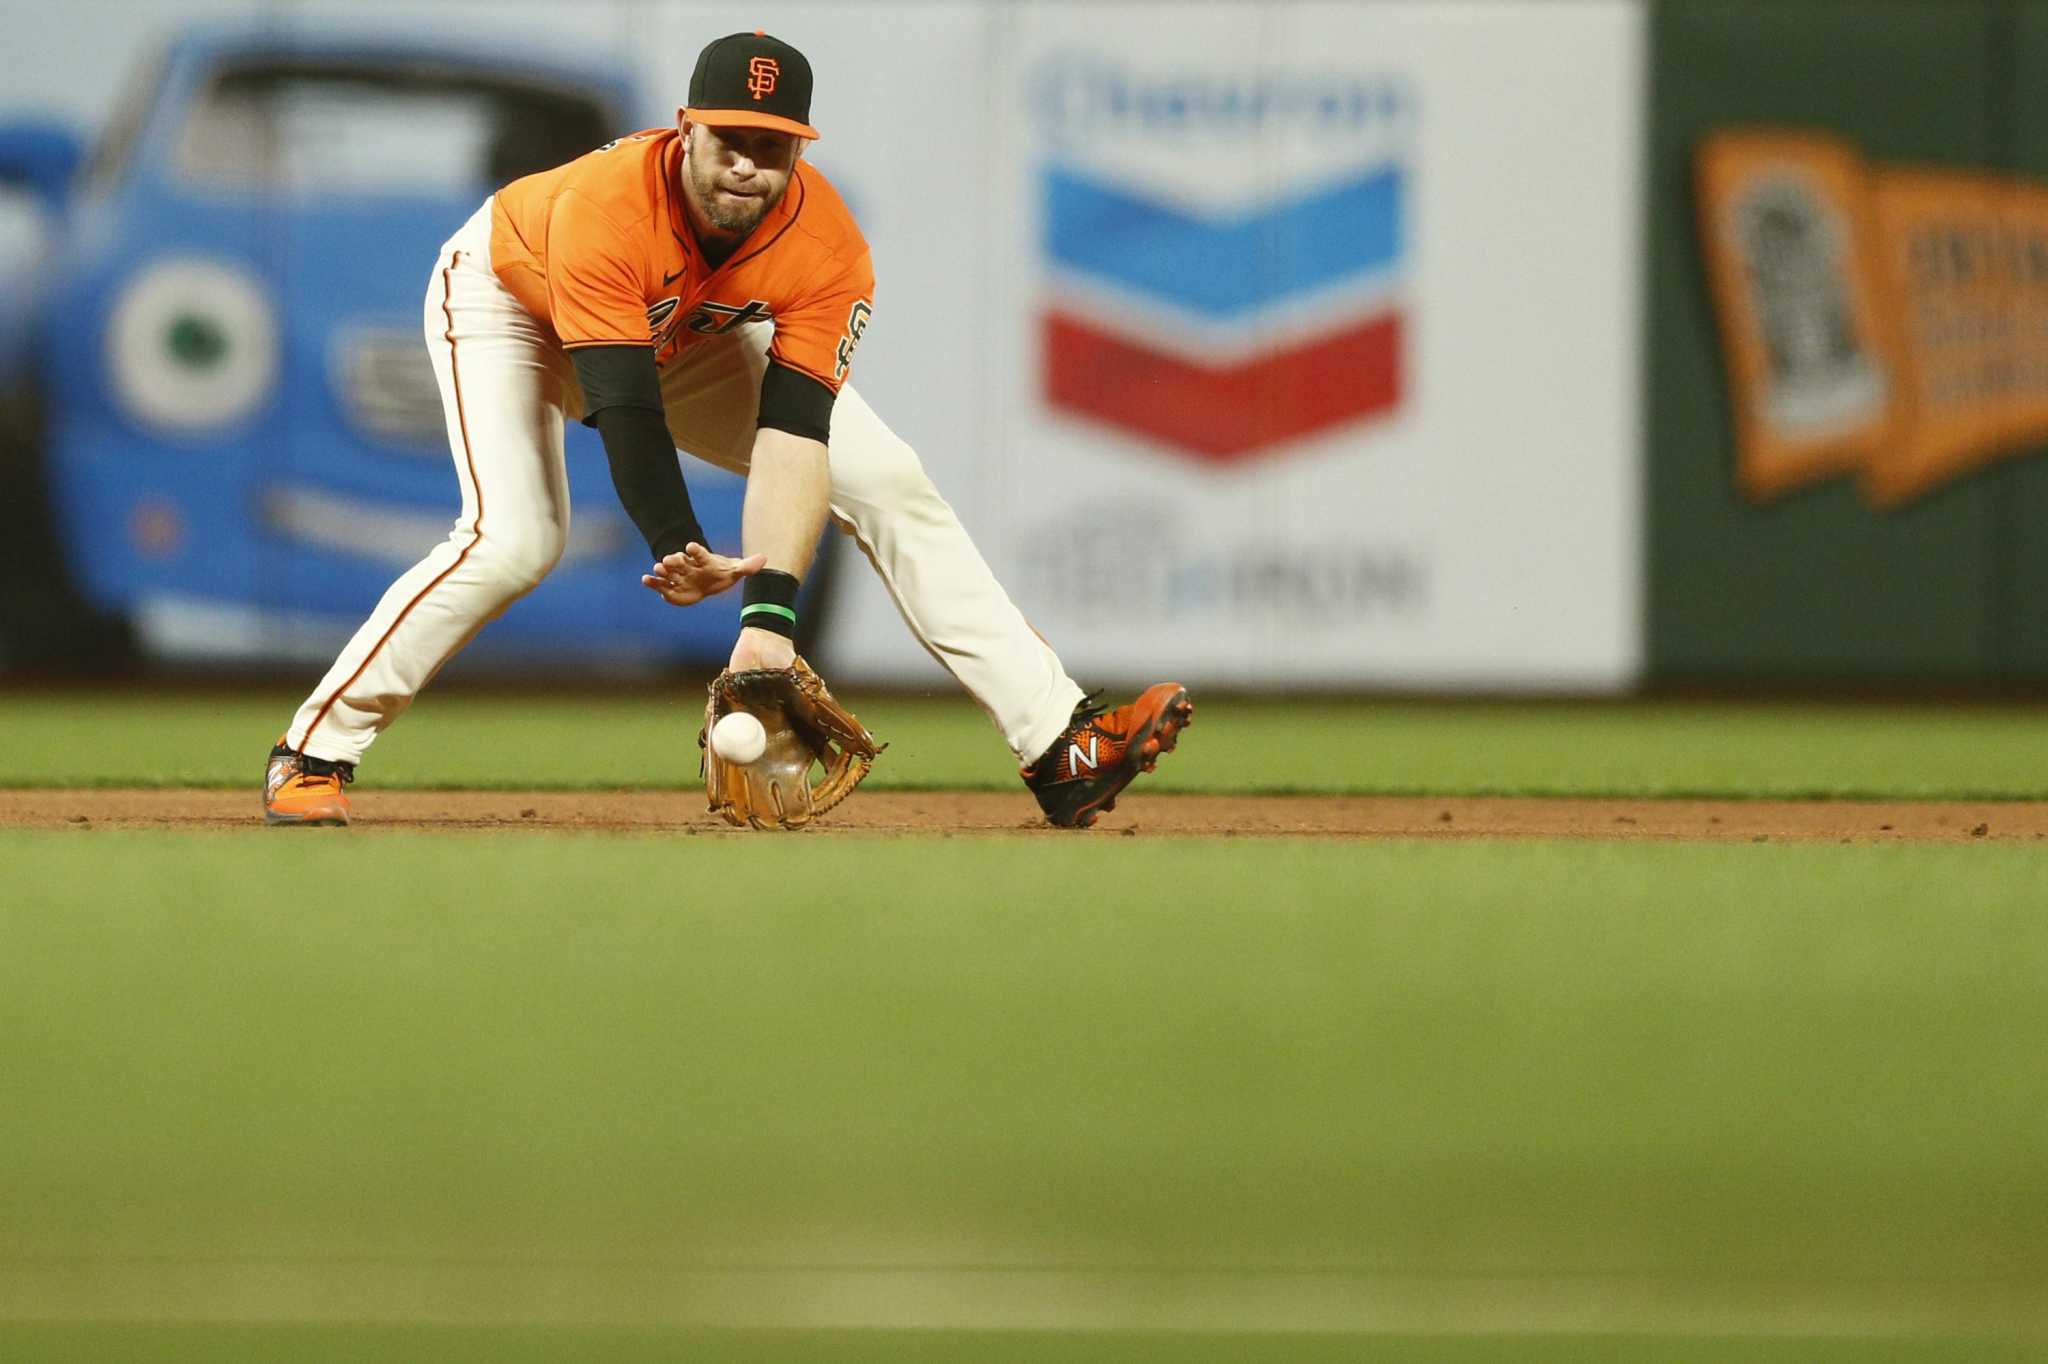 Giants' Longoria on injured list with hand injury, Gausman to COVID IL